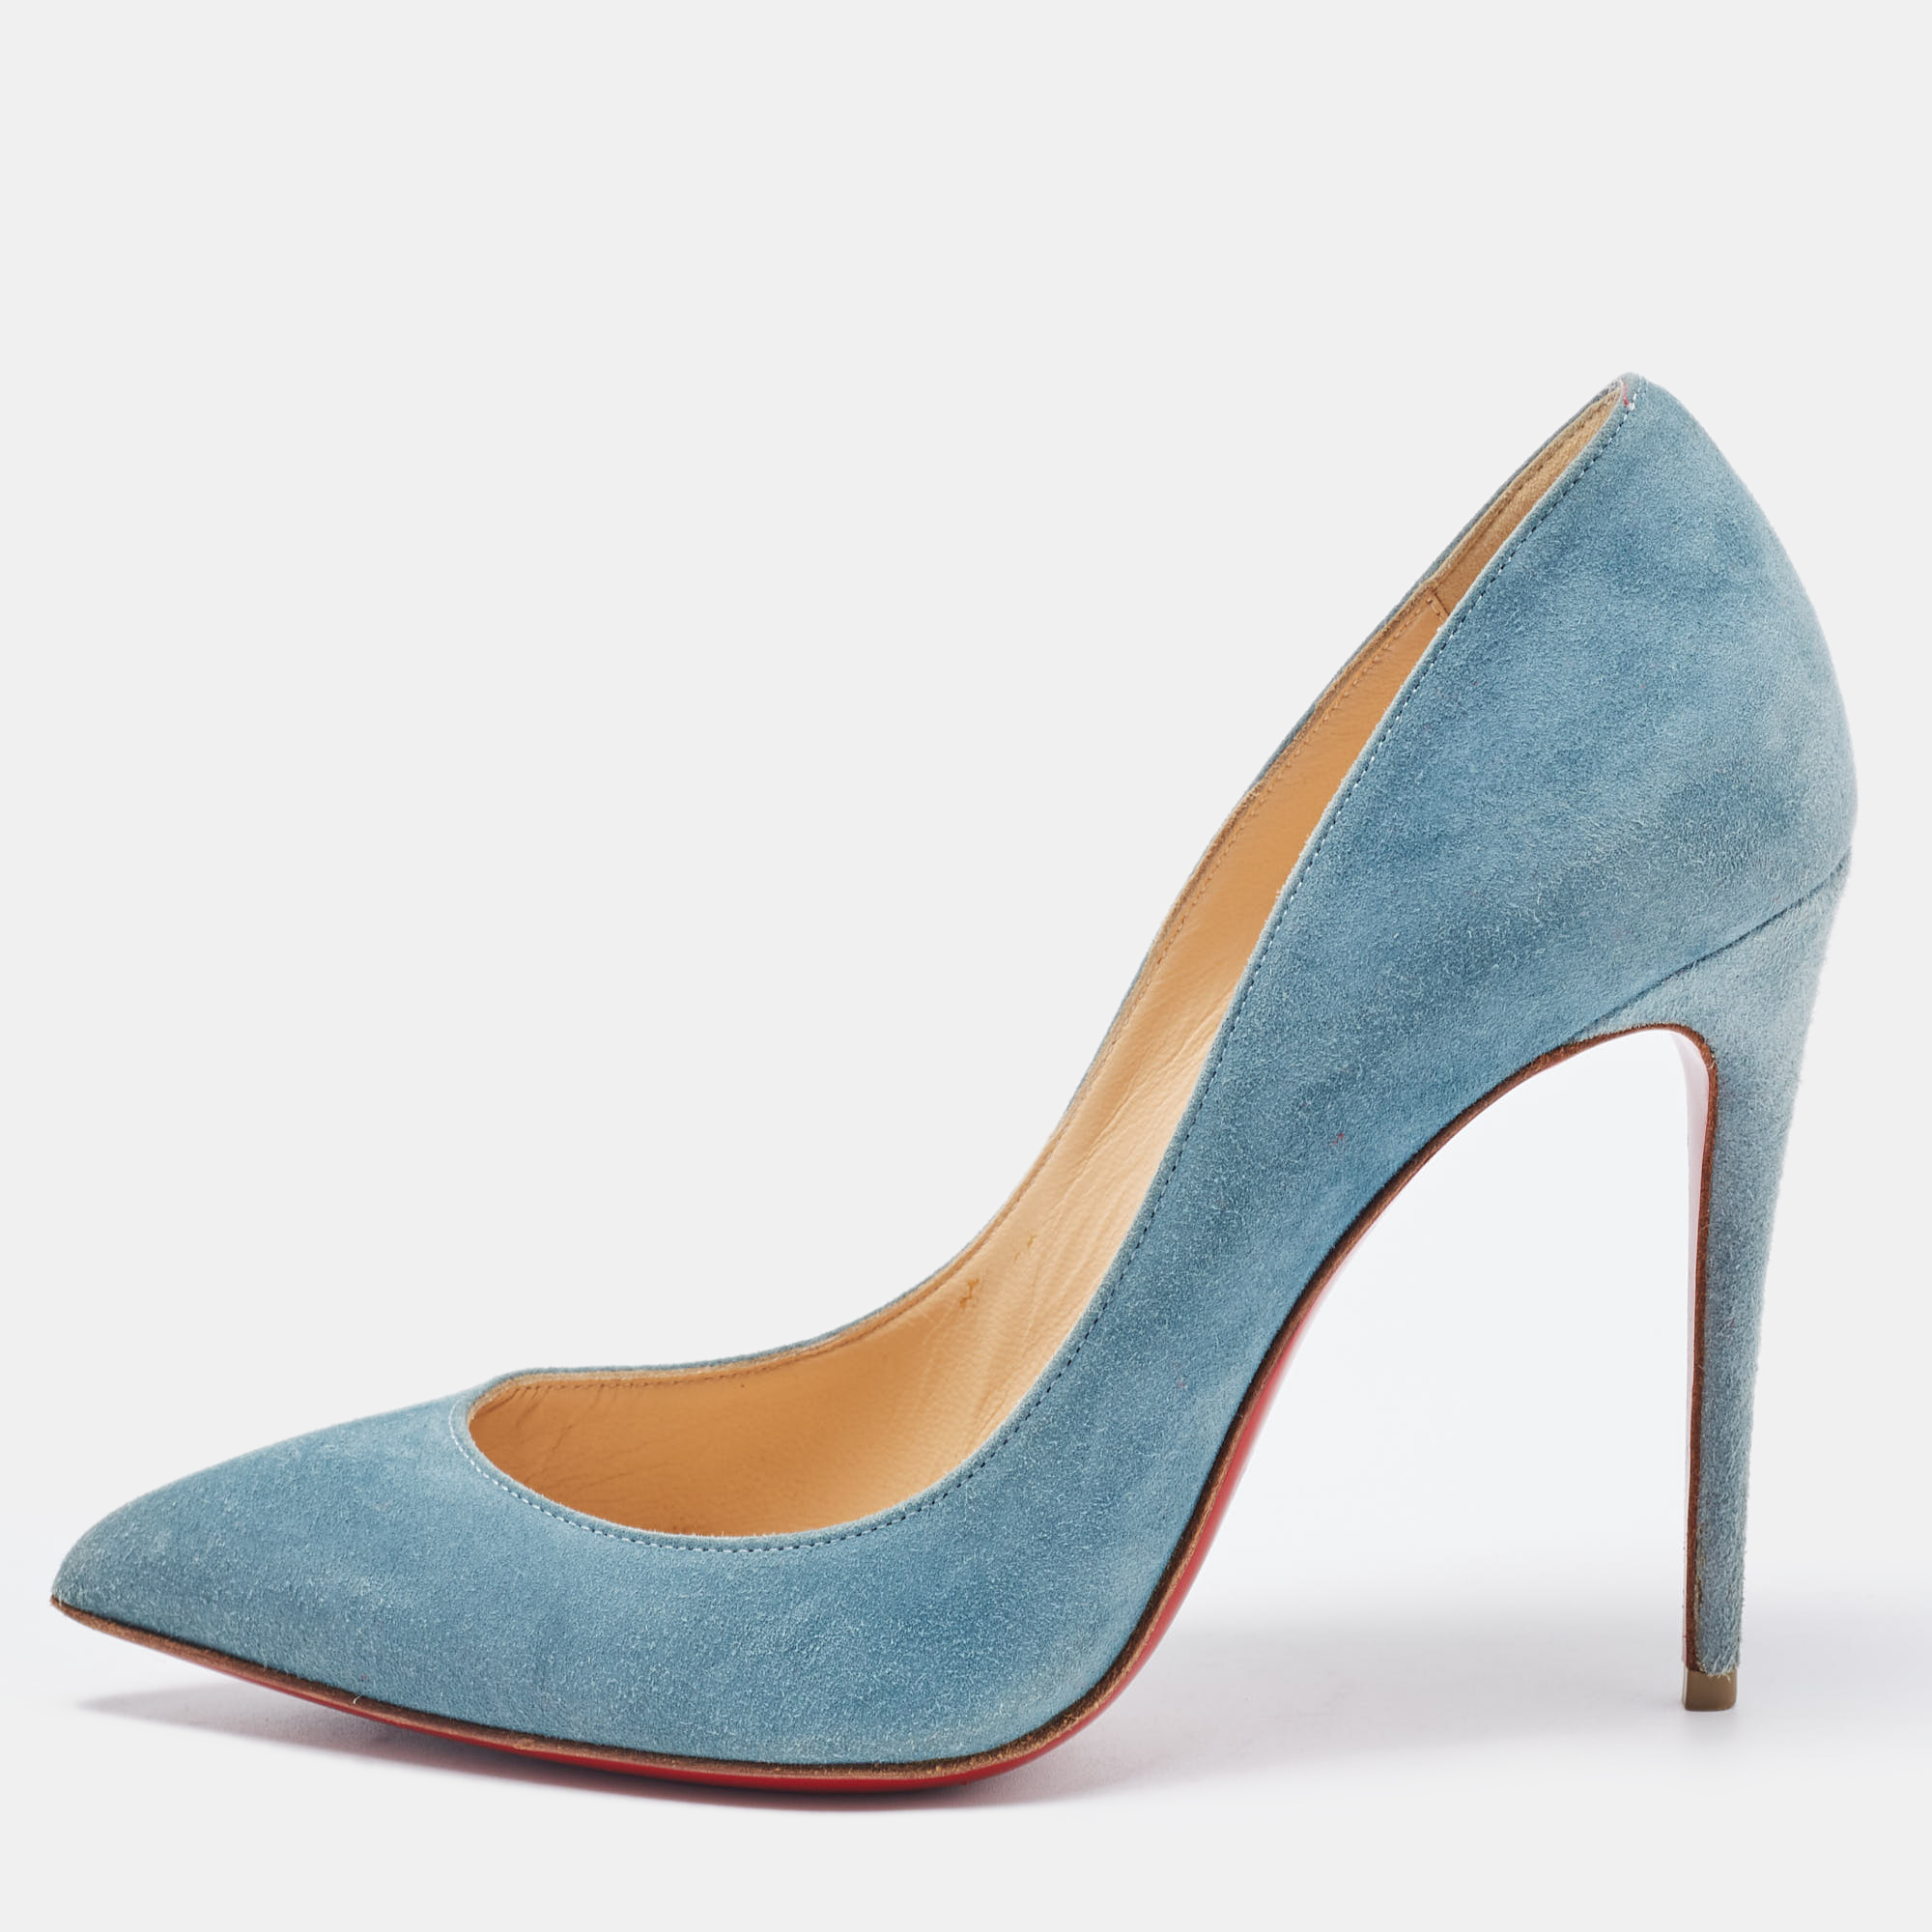 Pre-owned Christian Louboutin Blue Suede Pigalle Follies Pumps Size 37